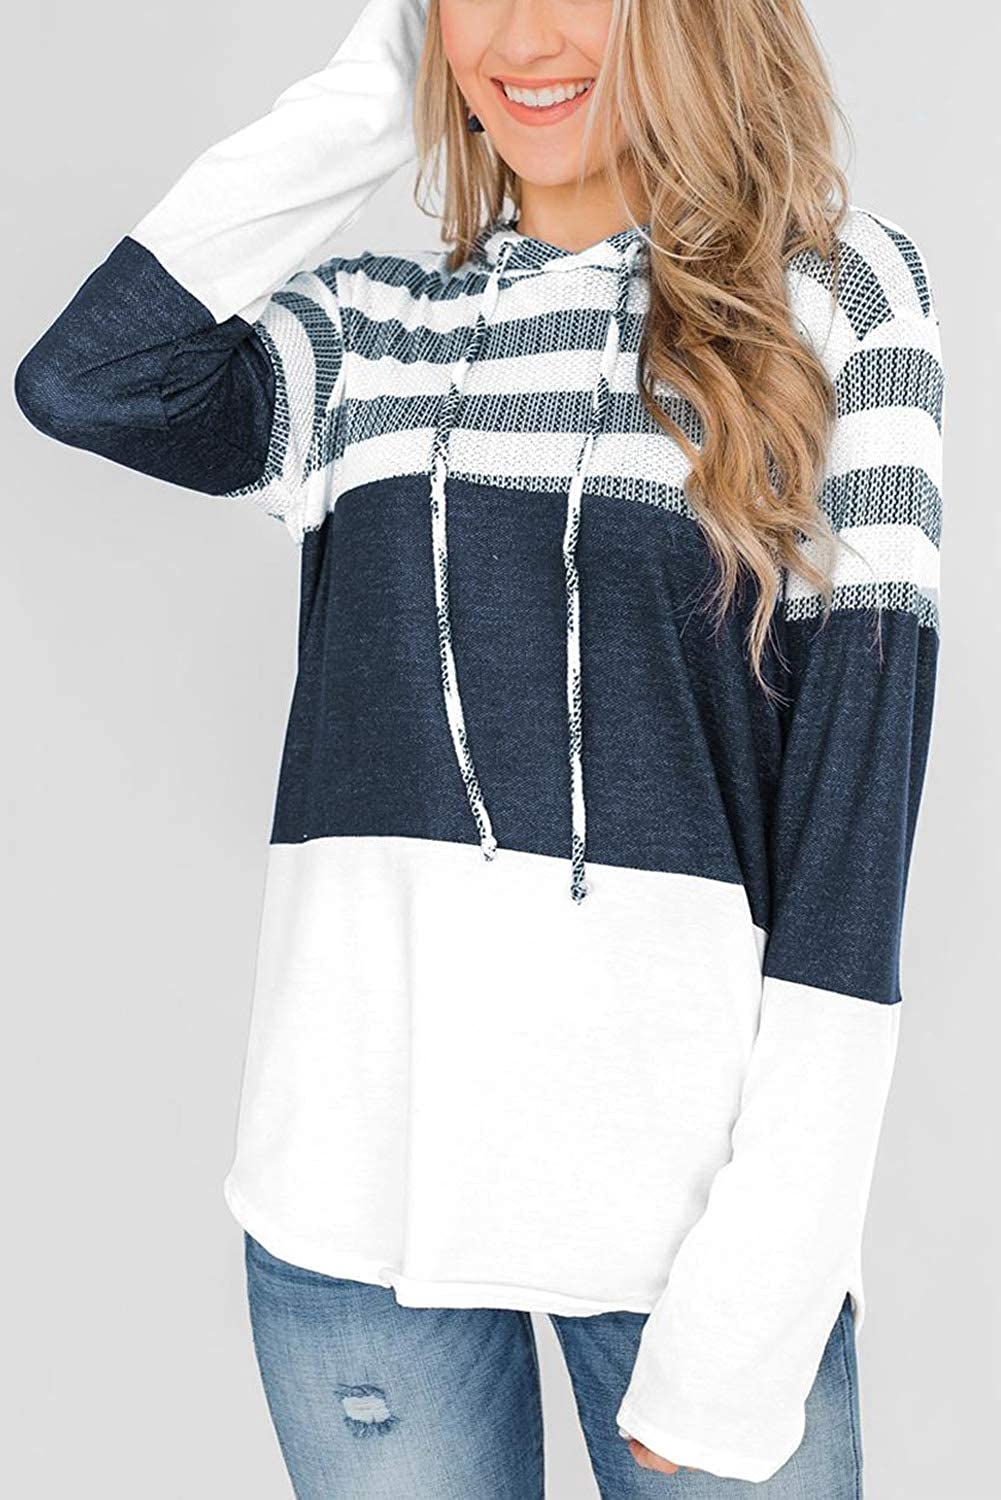 GOLDPKF Striped Color Block Hoodies for Womens Long Sleeve Pullover Sweatshirts 